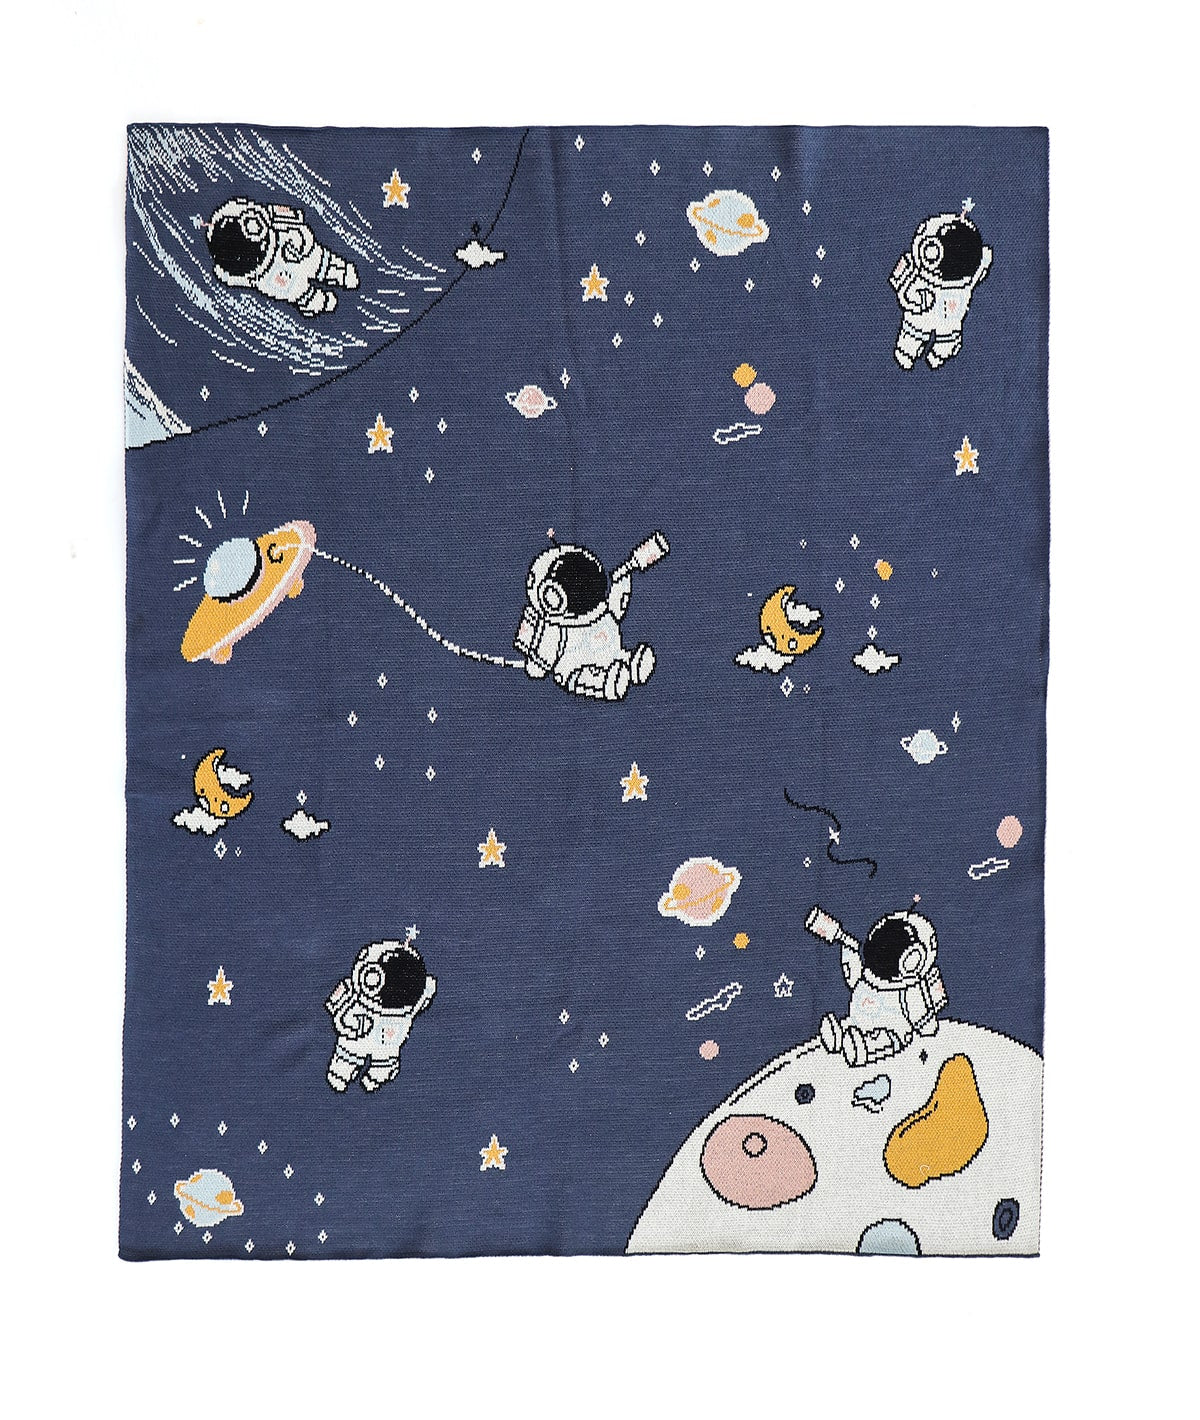 My Celestial Space- Tea Grey & Multi Color Cotton Knitted Ac Blanket For Baby / Infant / New Born For Use In All Seasons